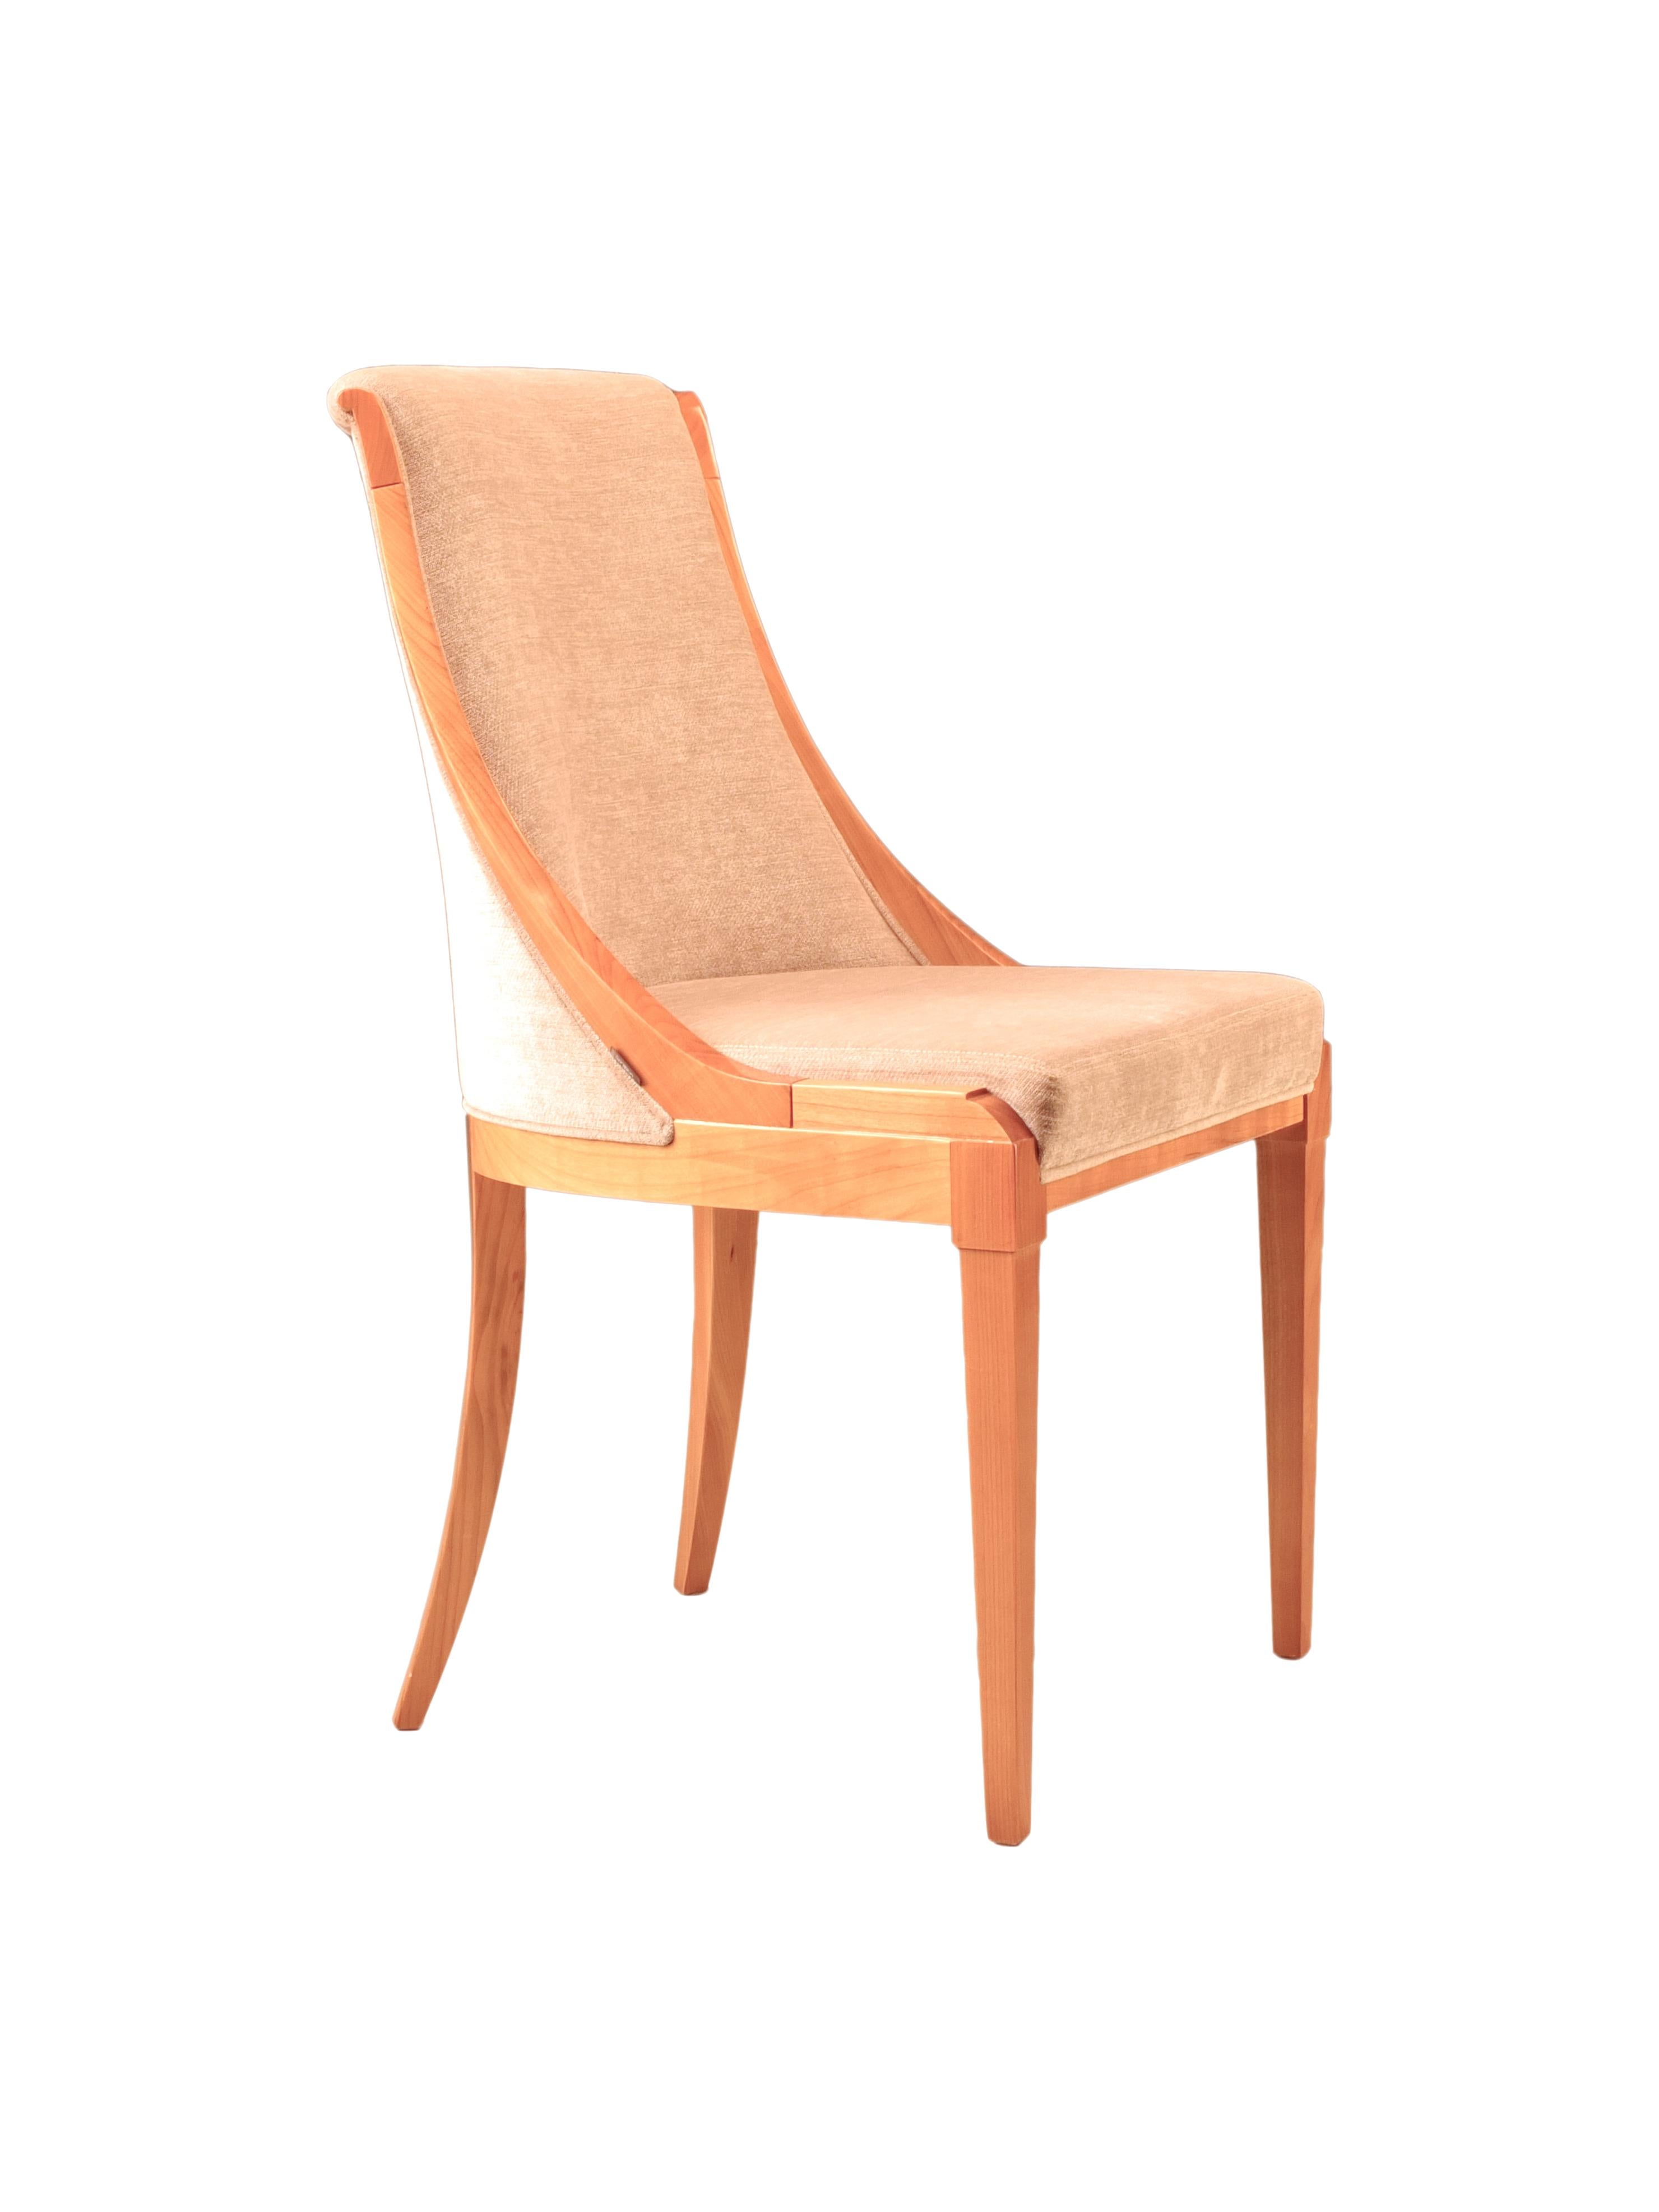 Musa, Upholstered Chair Made of Cherrywood In New Condition For Sale In Salizzole, IT